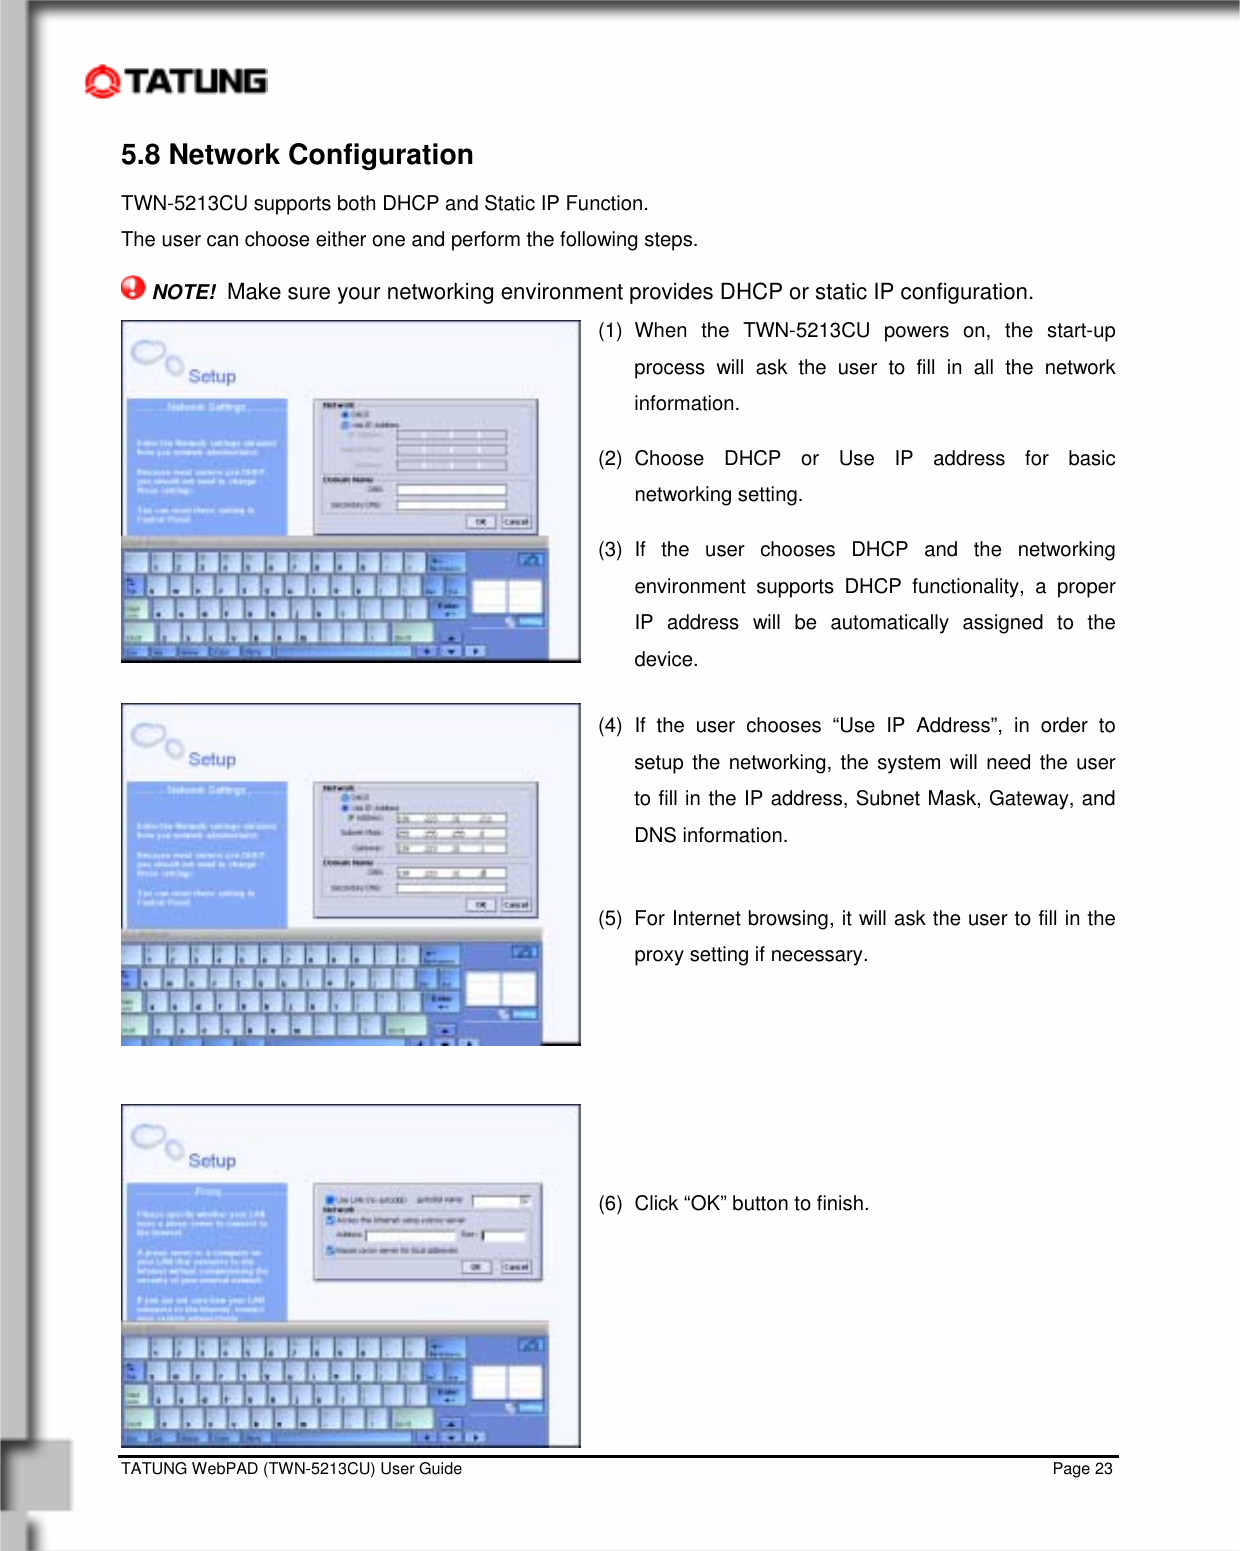    TATUNG WebPAD (TWN-5213CU) User Guide                                                                                                                                   Page 23 5.8 Network Configuration TWN-5213CU supports both DHCP and Static IP Function.   The user can choose either one and perform the following steps.  NOTE!  Make sure your networking environment provides DHCP or static IP configuration.  (1) When the TWN-5213CU powers on, the start-up process will ask the user to fill in all the network information. (2) Choose DHCP or Use IP address for basic networking setting. (3) If the user chooses DHCP and the networking environment supports DHCP functionality, a proper IP address will be automatically assigned to the device. (4) If the user chooses “Use IP Address”, in order to setup the networking, the system will need the user to fill in the IP address, Subnet Mask, Gateway, and DNS information.  (5)  For Internet browsing, it will ask the user to fill in the proxy setting if necessary.   (6)  Click “OK” button to finish.     